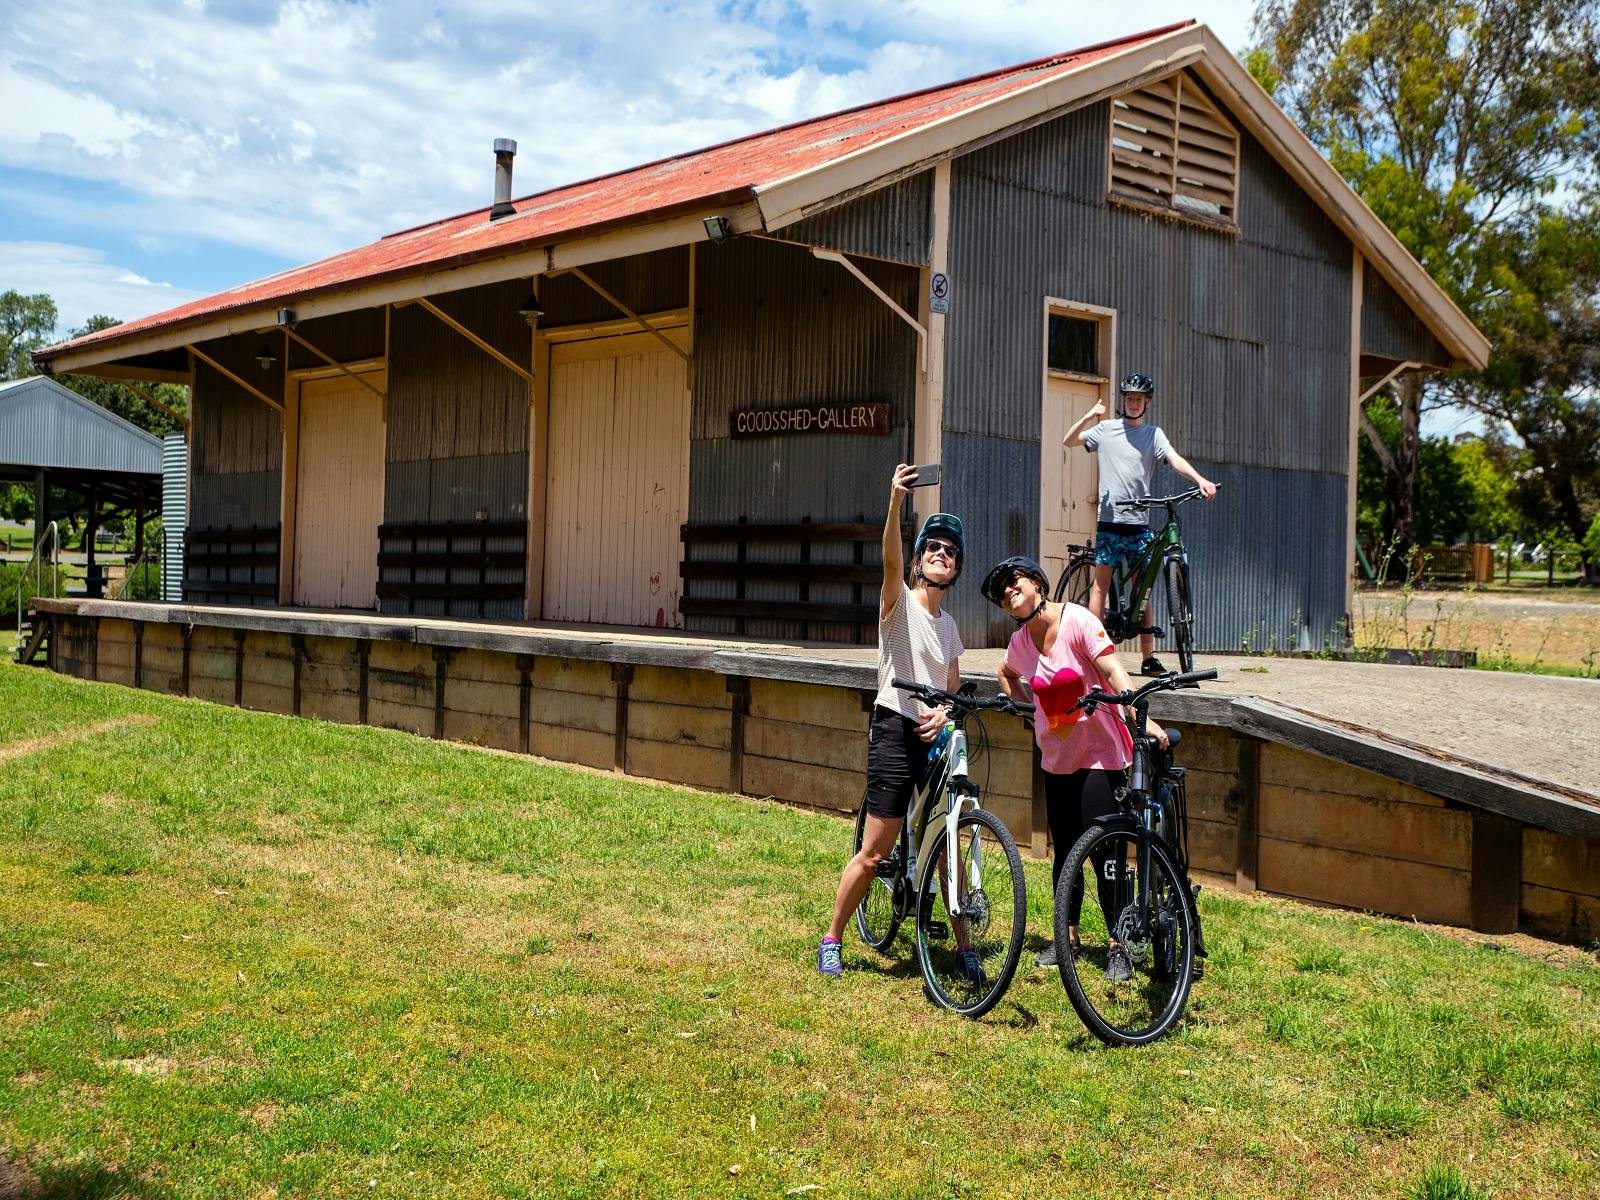 cyclists take a photo in front of a historic railway station along the Great Victorian Rail  Trail